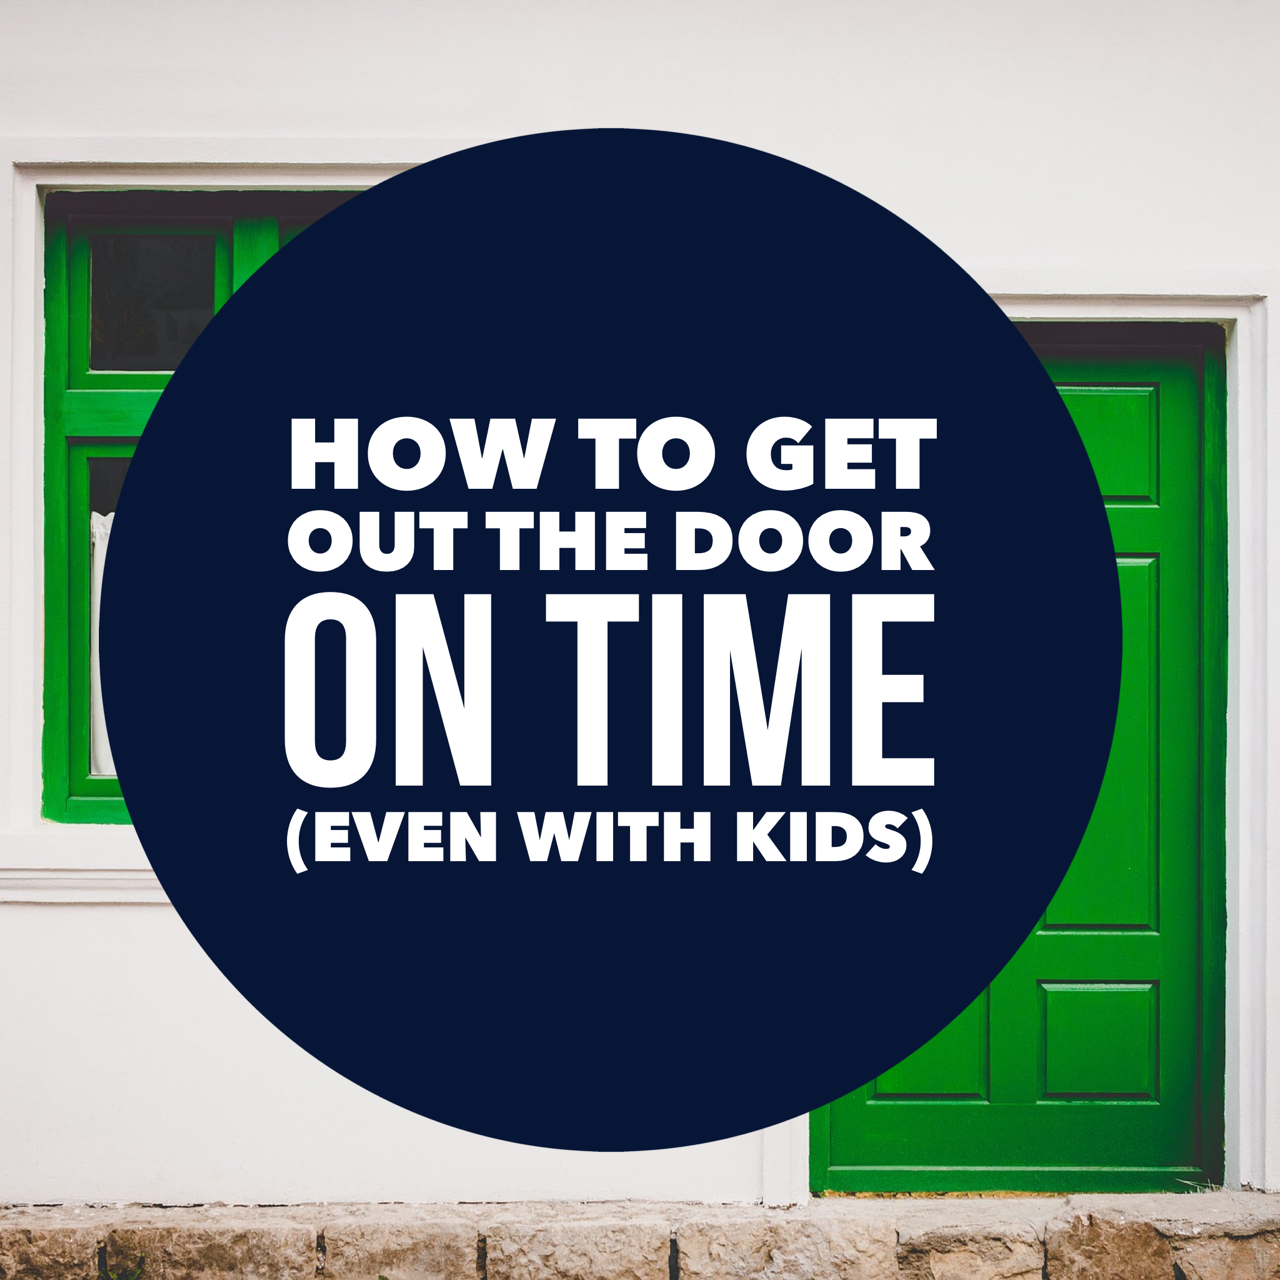 How to get out the door on time (even with kids)